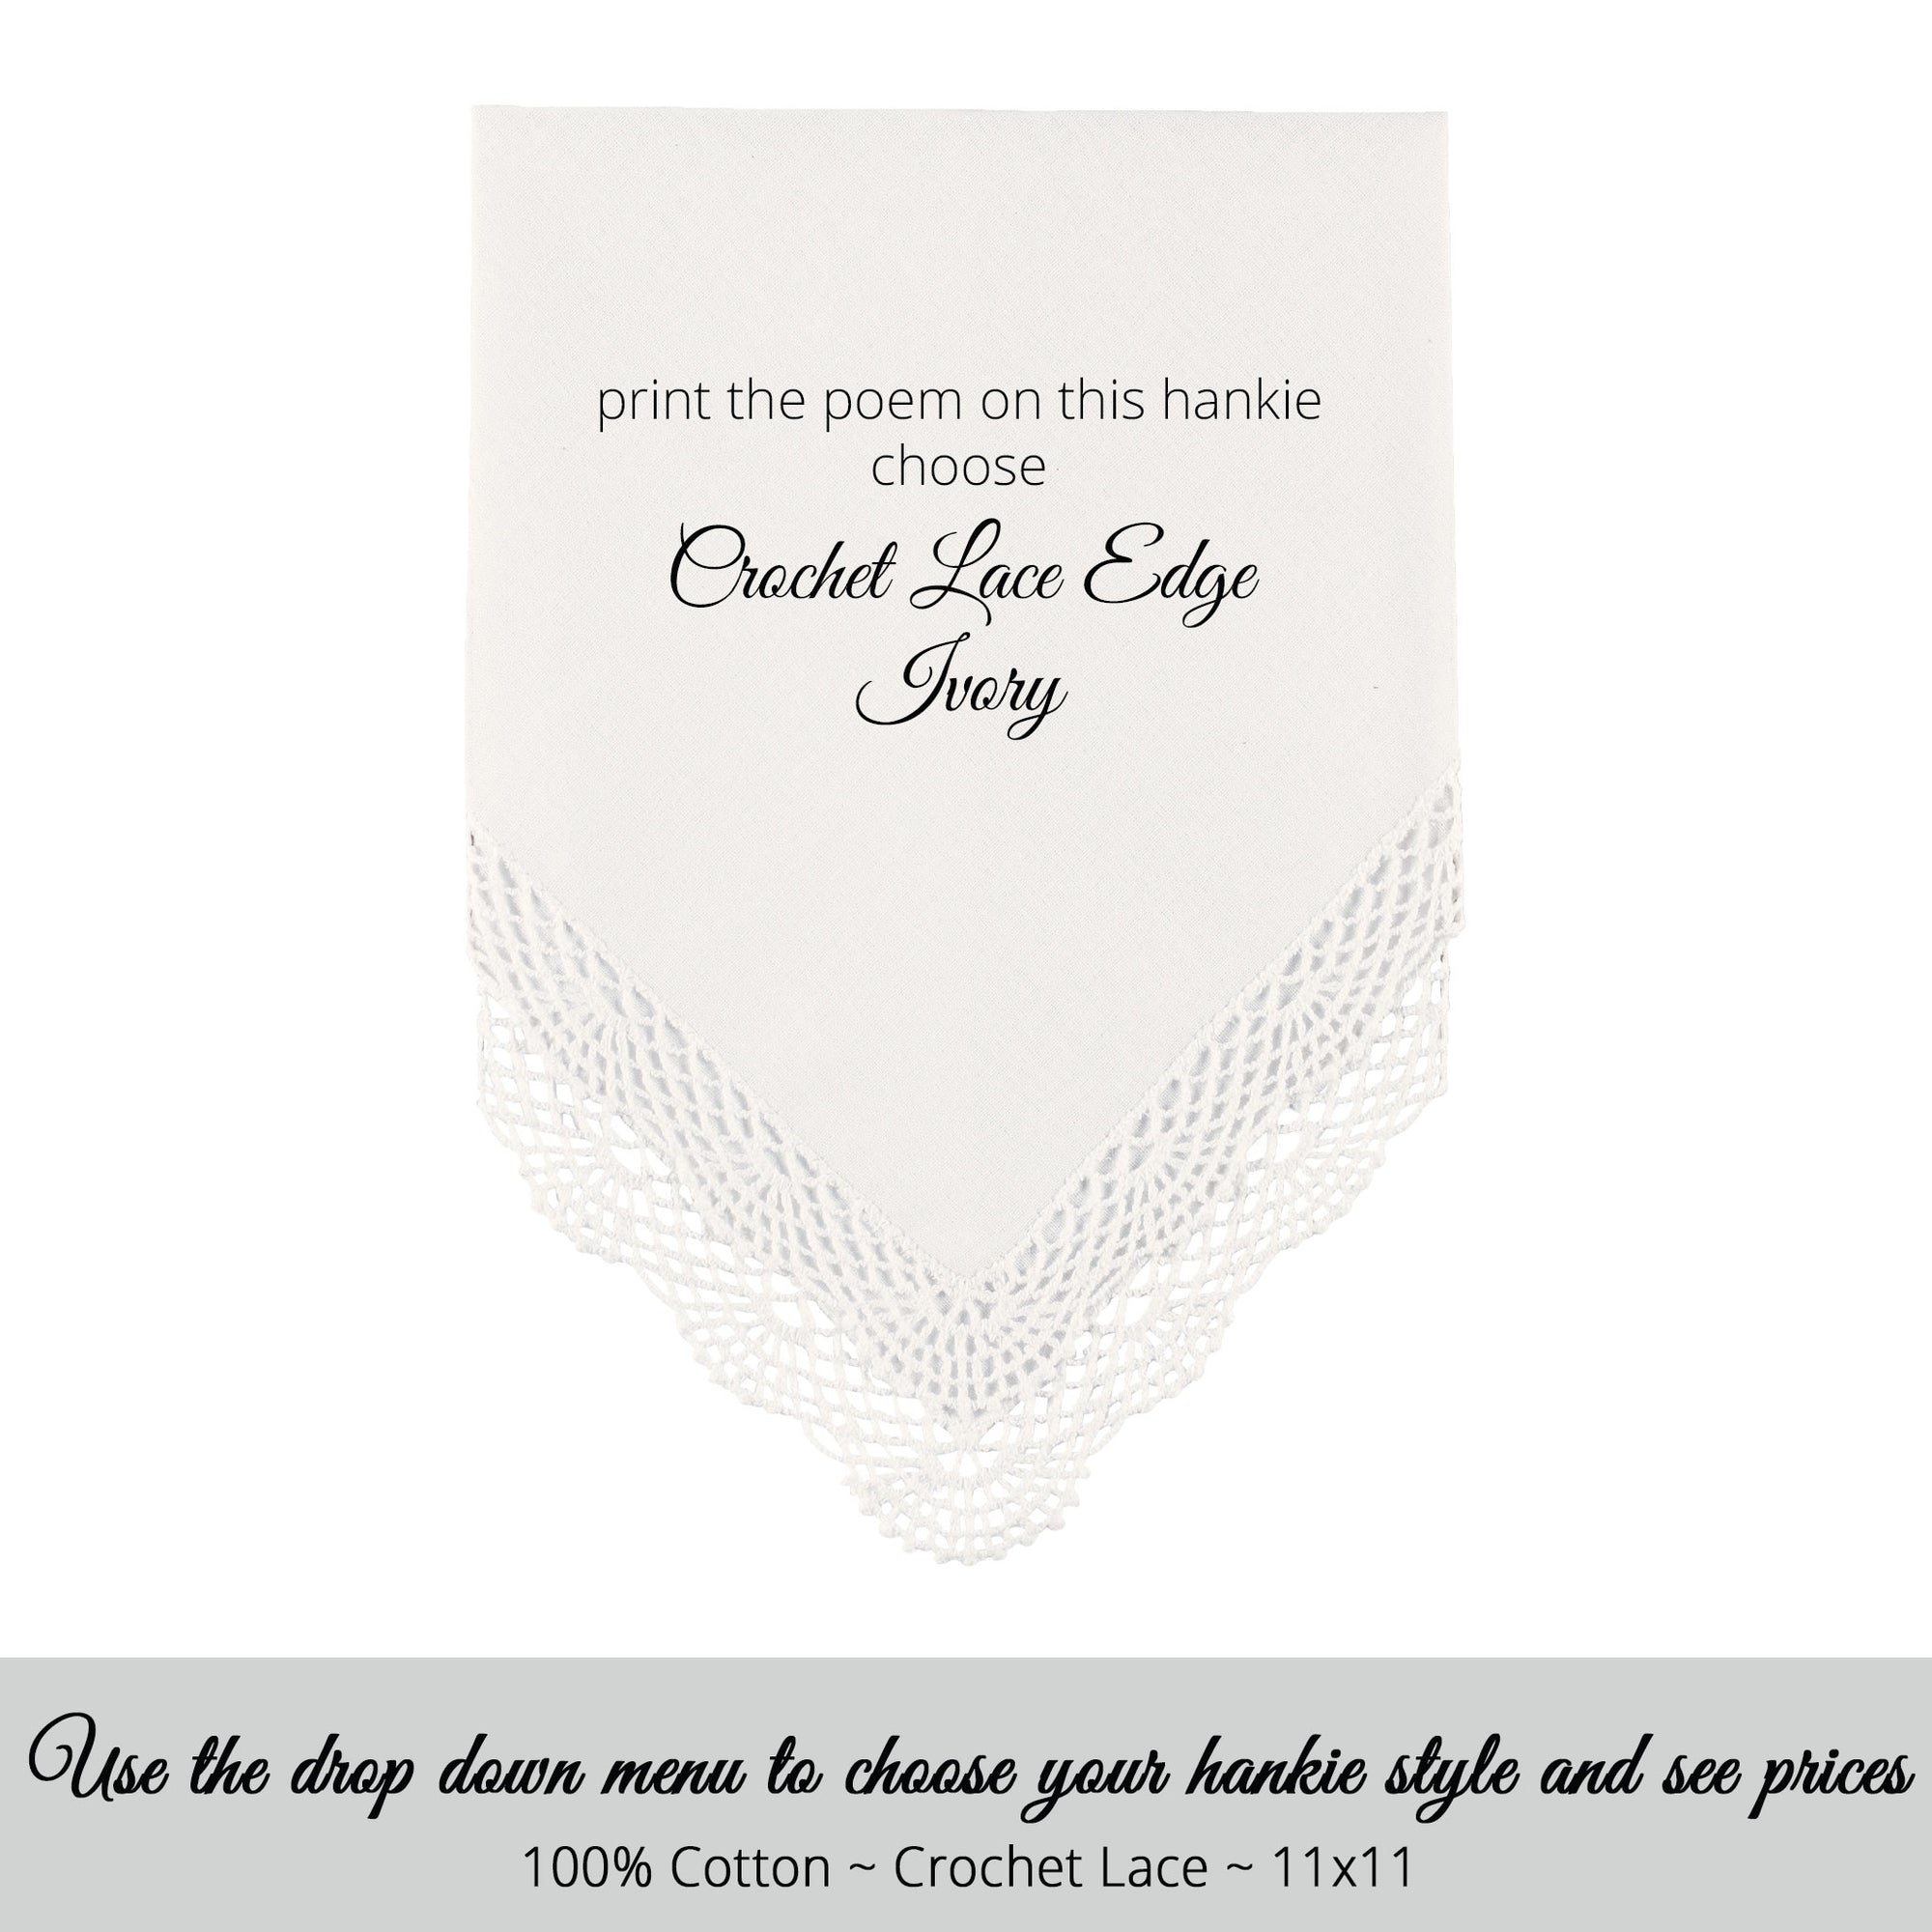 Wedding handkerchief ivory with crochet lace edge for the stepdaughter of the bride poem printed hankie